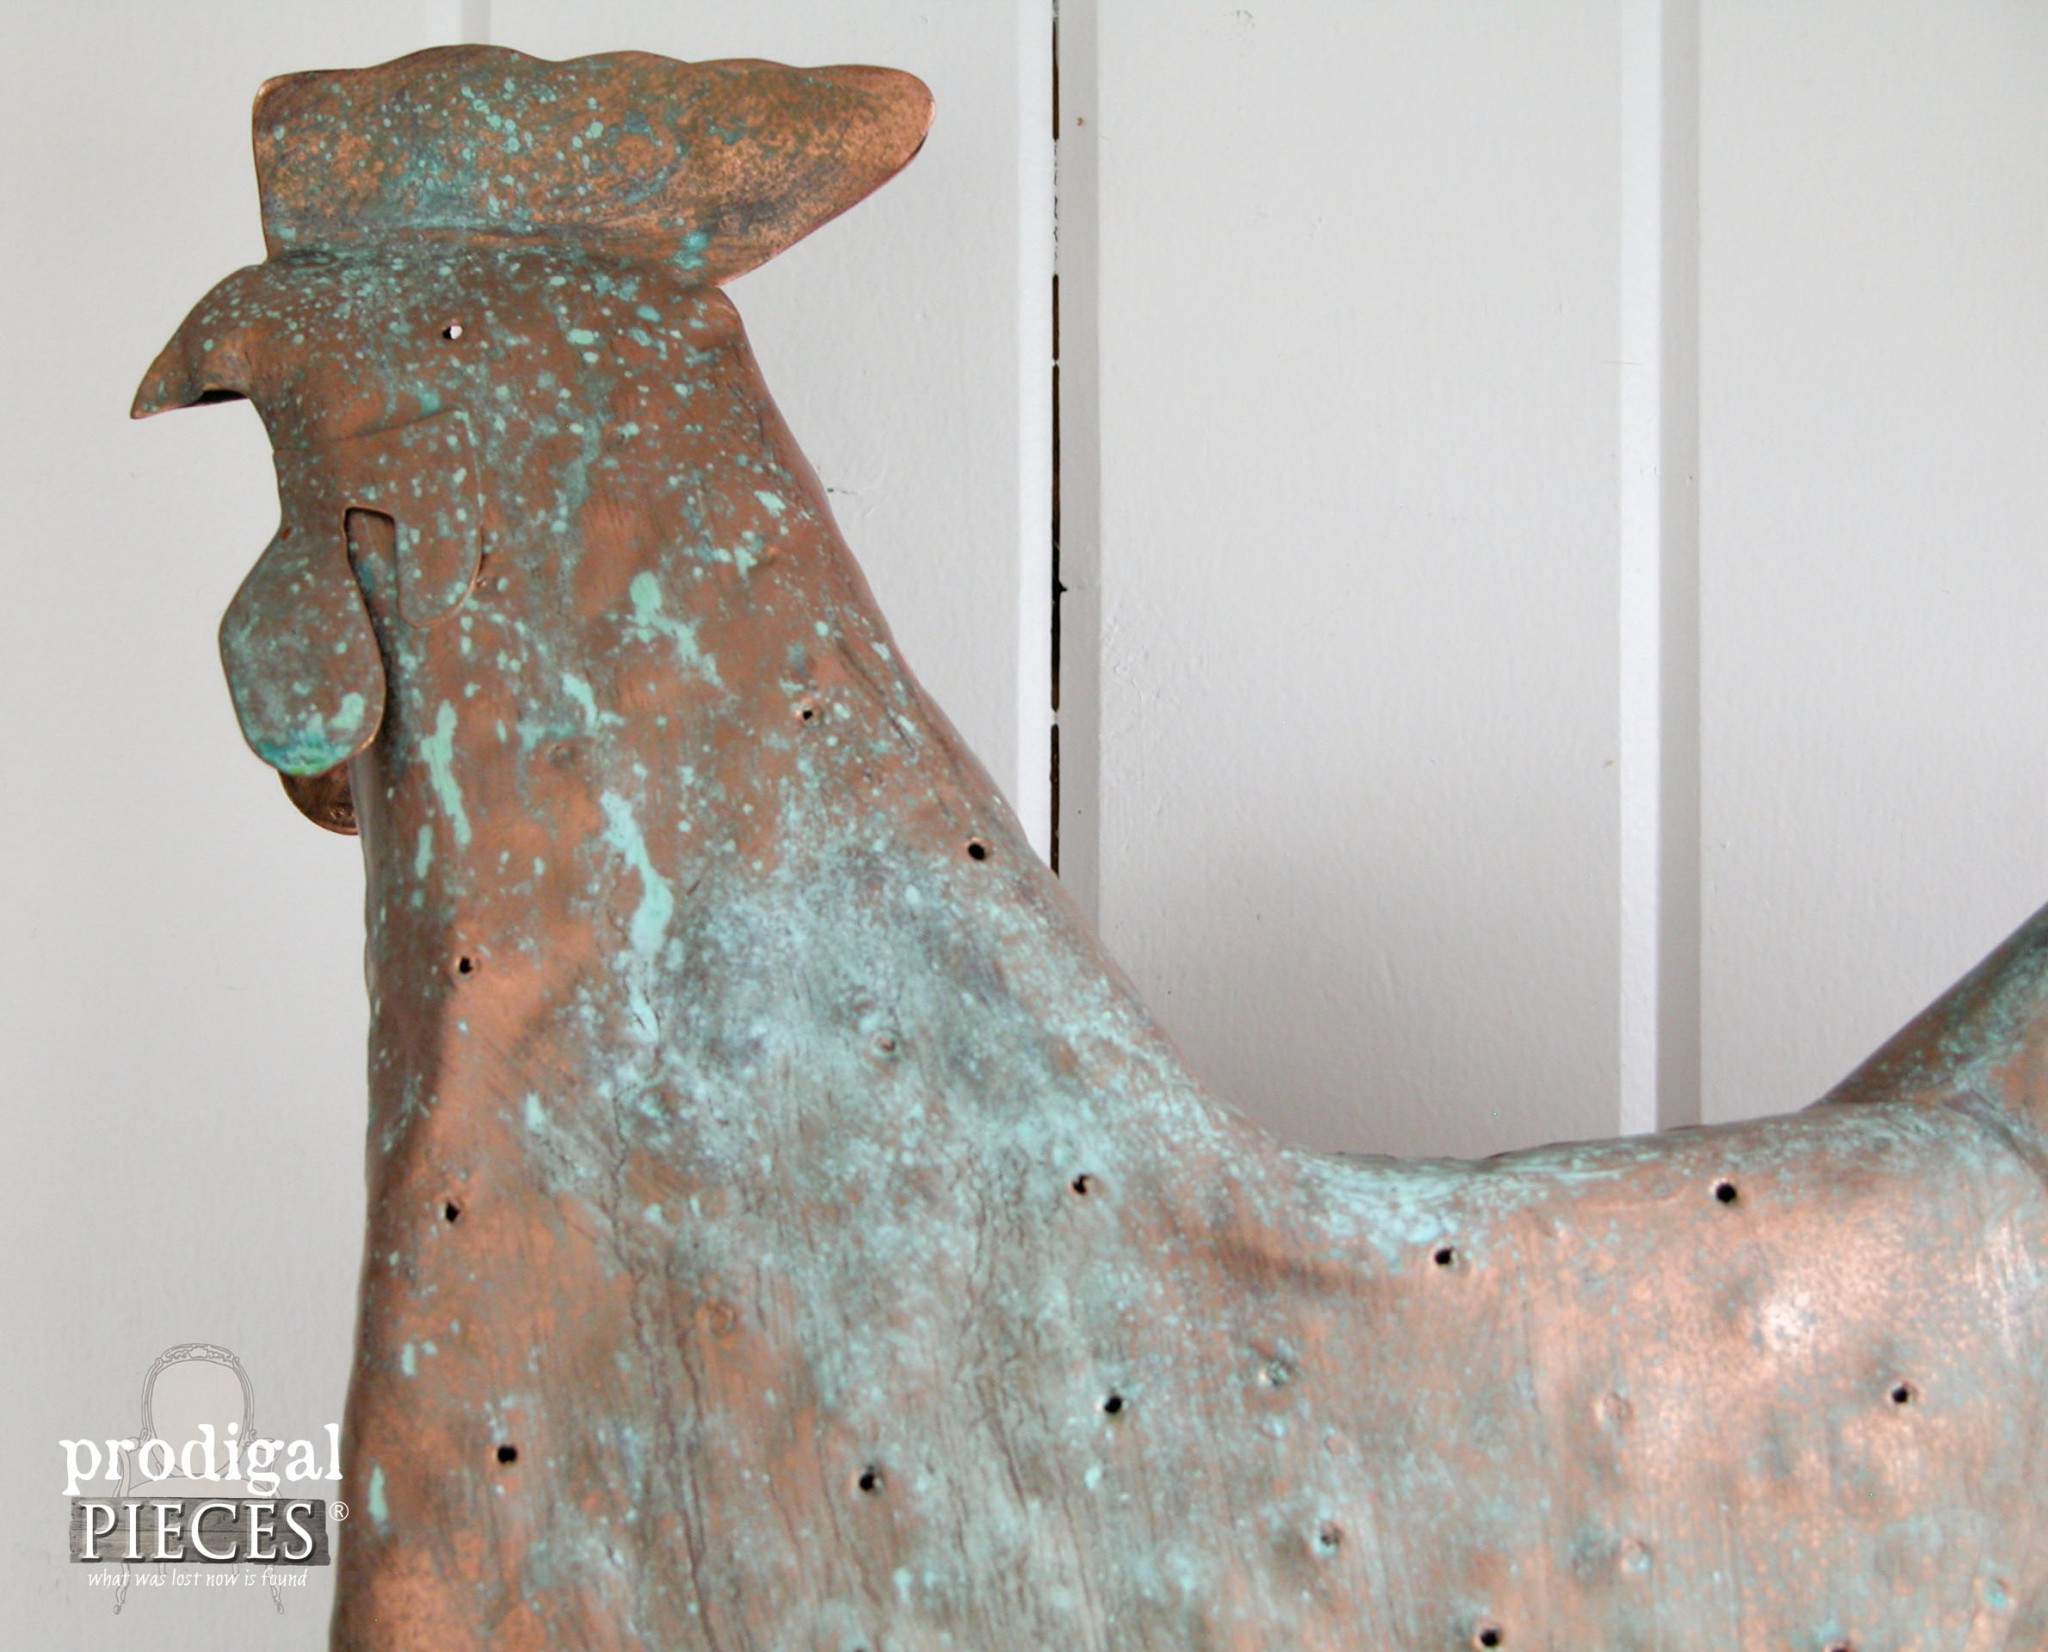 Close-up of Copper Patina on Reclaimed Metal Art by Prodigal Pieces | prodigalpieces.com